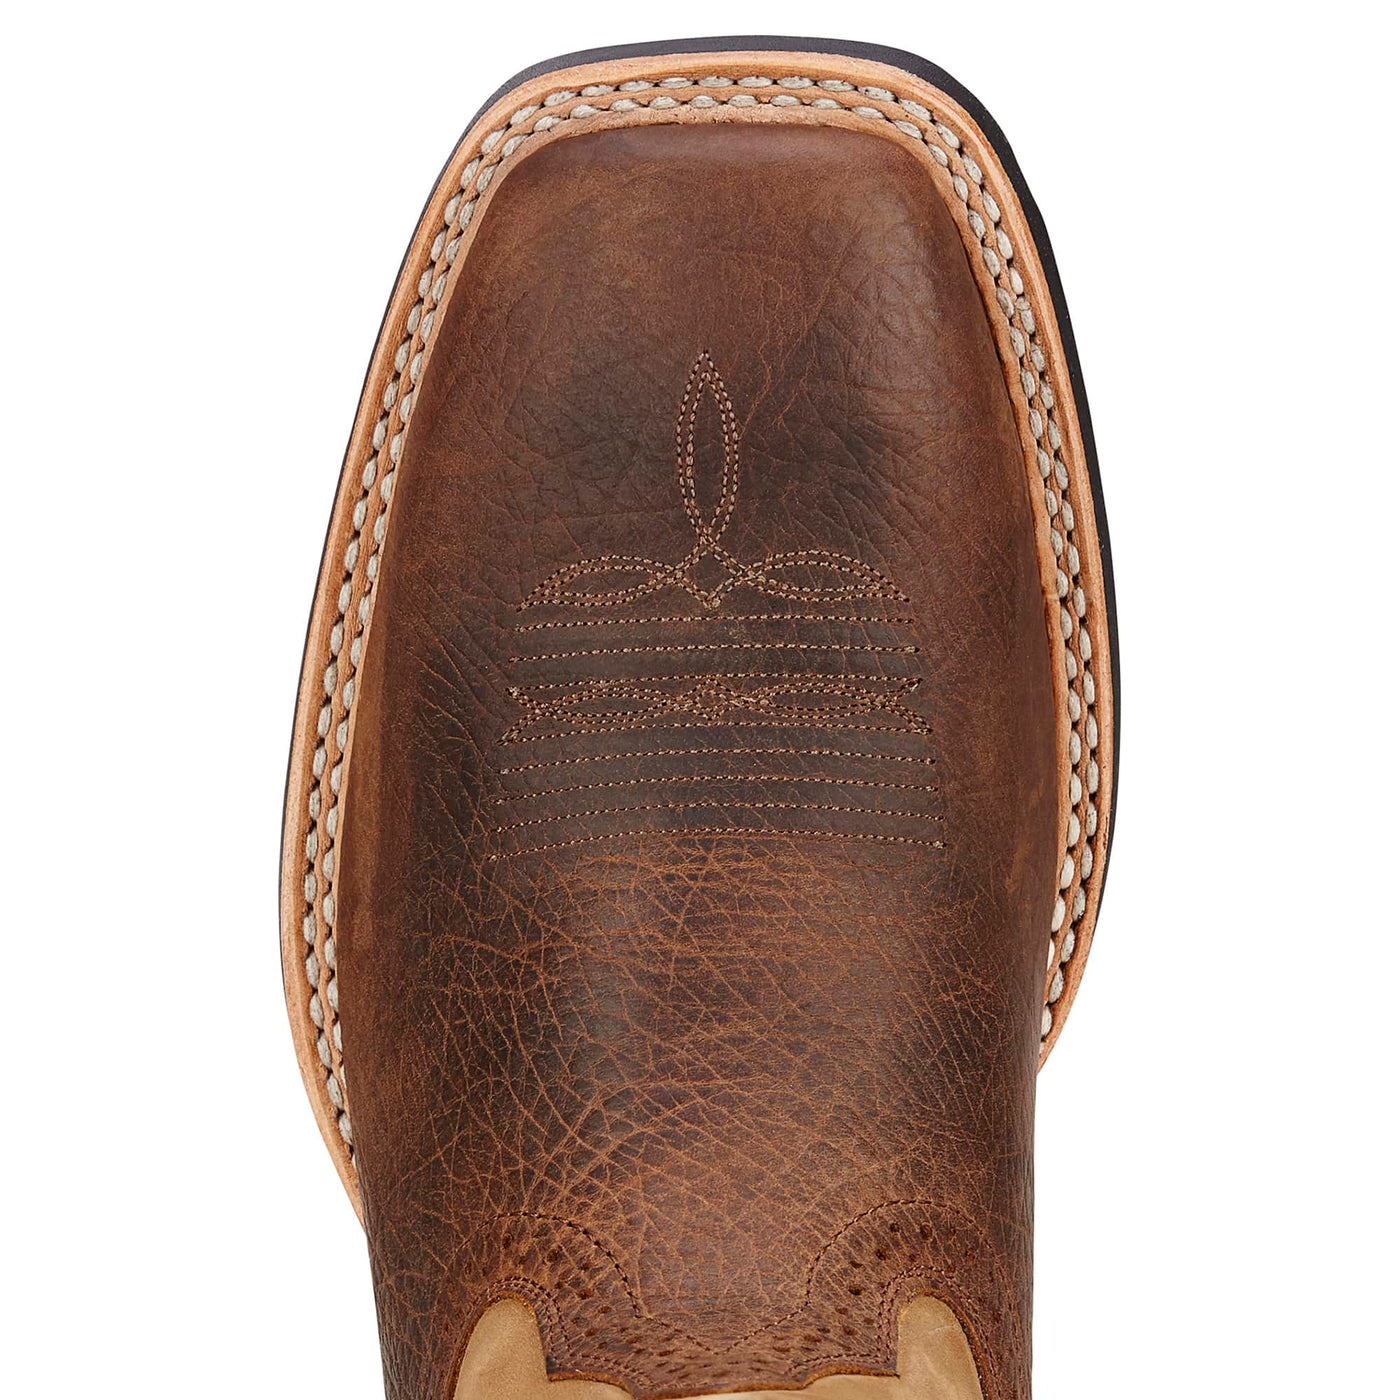 Ariat Boots | Men's Western Cowboy | Quickdraw | Toe | Outback Traders Australia